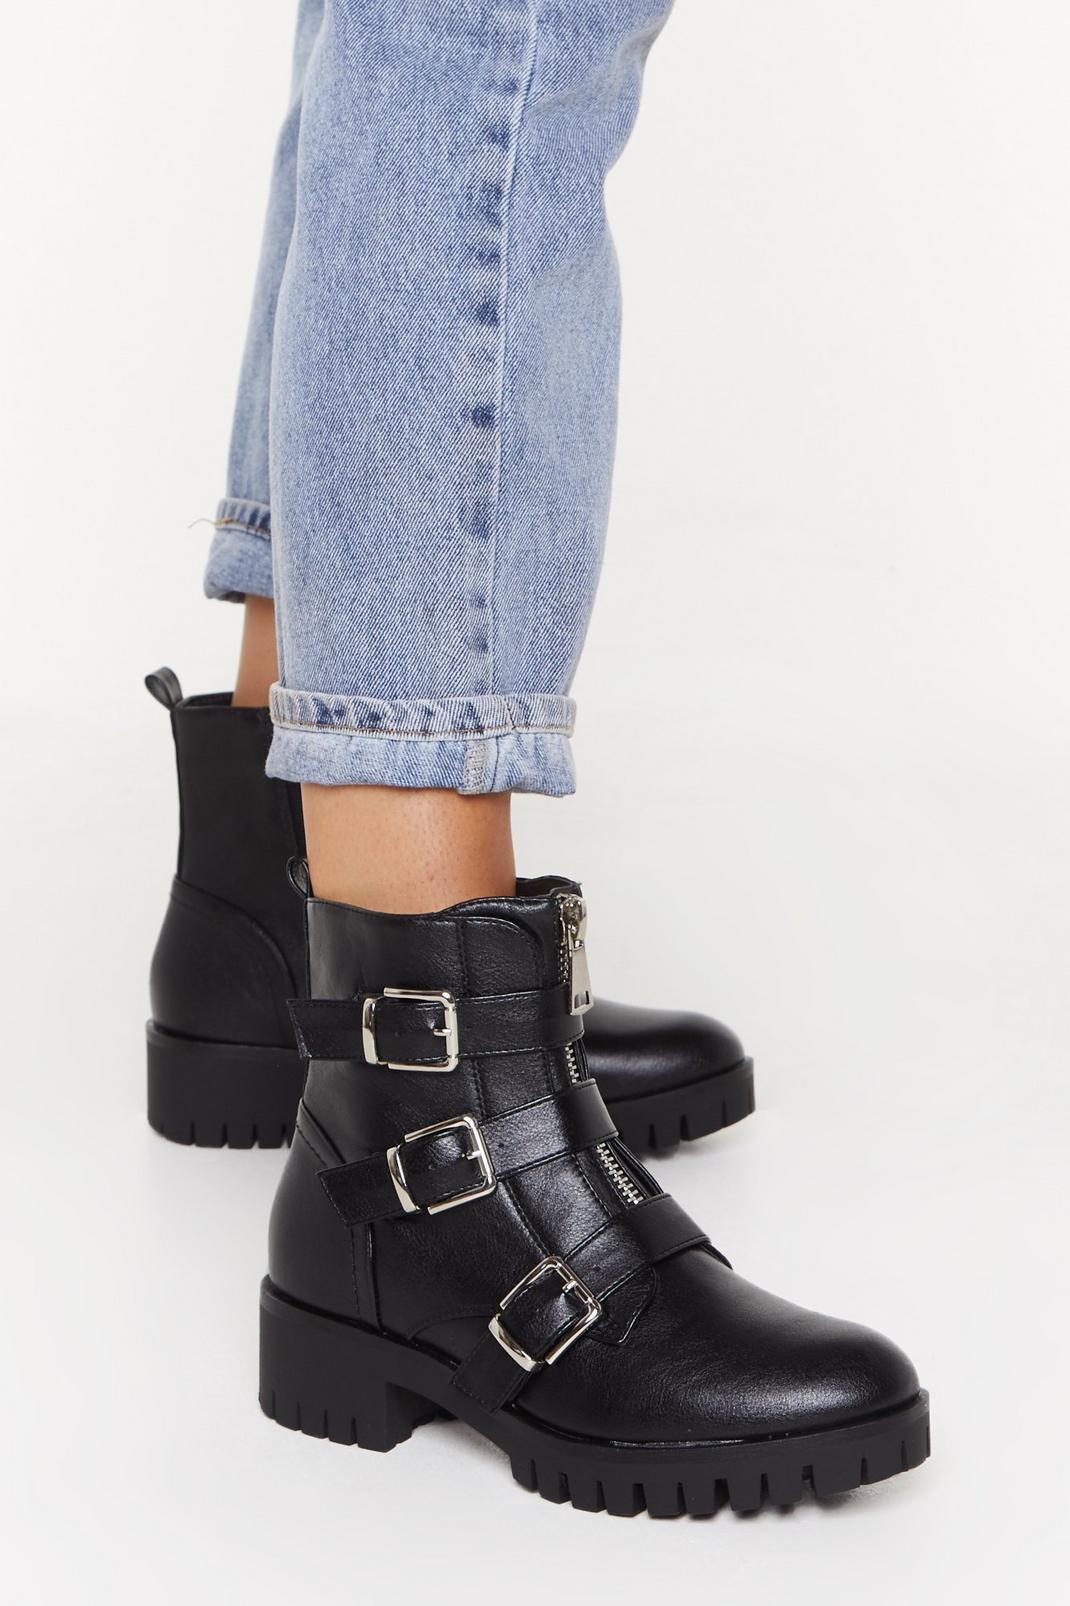 Just Don't Give a Buck-le Faux Leather Biker Boots | Nasty Gal